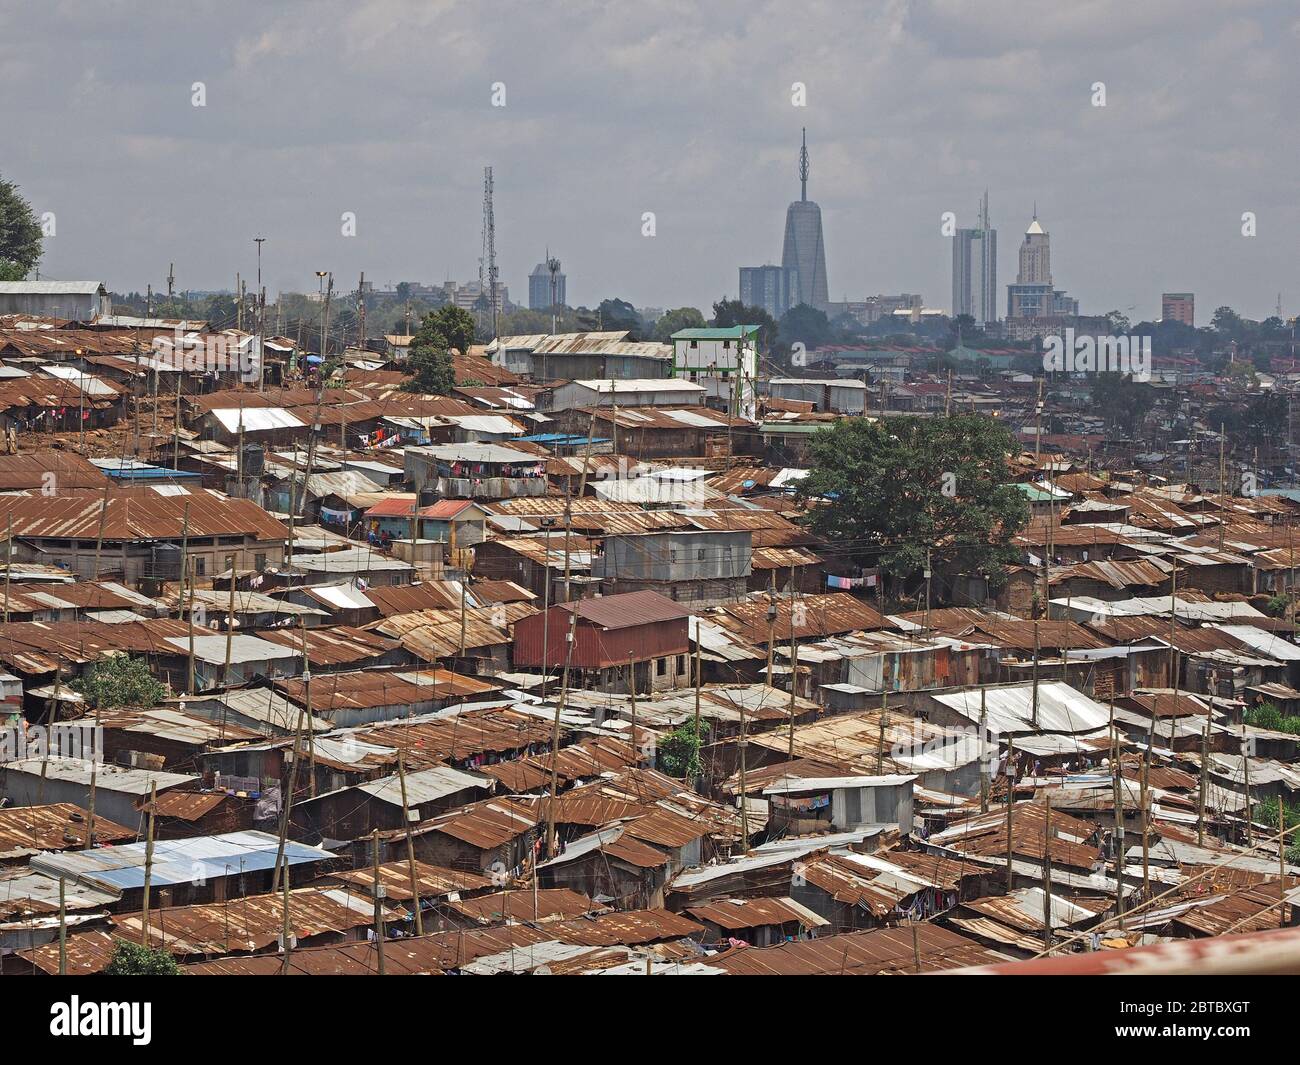 view over the tin roofs of the infamous Kibera slum district towards a skyline of modern skyscraper buildings of 21st century Nairobi in Kenya, Africa Stock Photo